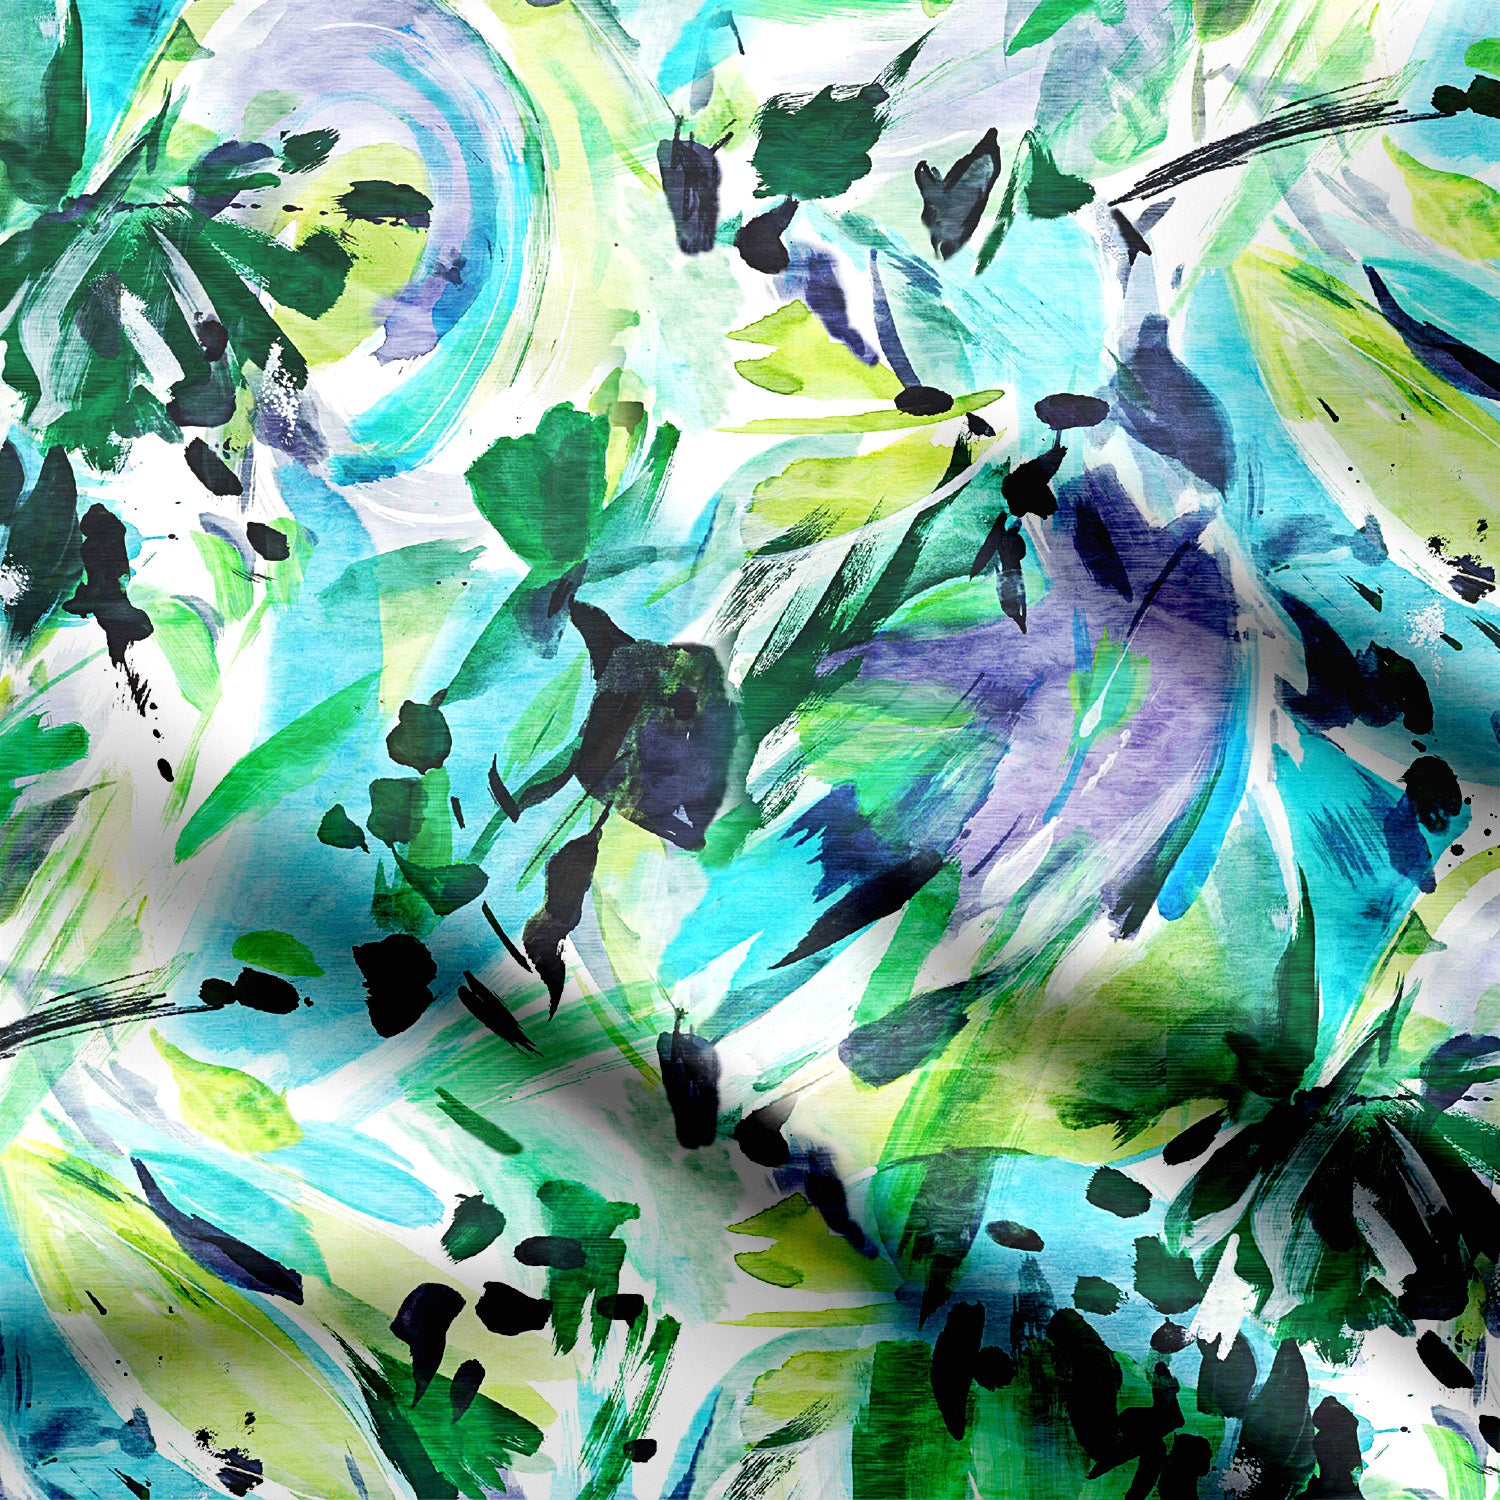 Leafy Painted Abstract-41131, Abstract, Abstract Collection, Abstract Design Challenge, All Designs, Chinnon Chiffon, cotton, Cotton Canvas, Cotton Poplin, Cotton Satin, Crepe, FEATURED ARTIST DESIGNS, Giza Cotton, Light Chiffon, Modal Satin, Muslin, Natural Crepe, Organic Cotton Bamboo, Organza, Organza Satin, Organza Satin (Polyester), pashmina, Poly Canvas, Poly Cotton, Pure Linen, Rayon, Satin, Satin Linen, Tuusha Shah, Velvet Velure, Viscose Dola Silk, Viscose Georgette-Symplico